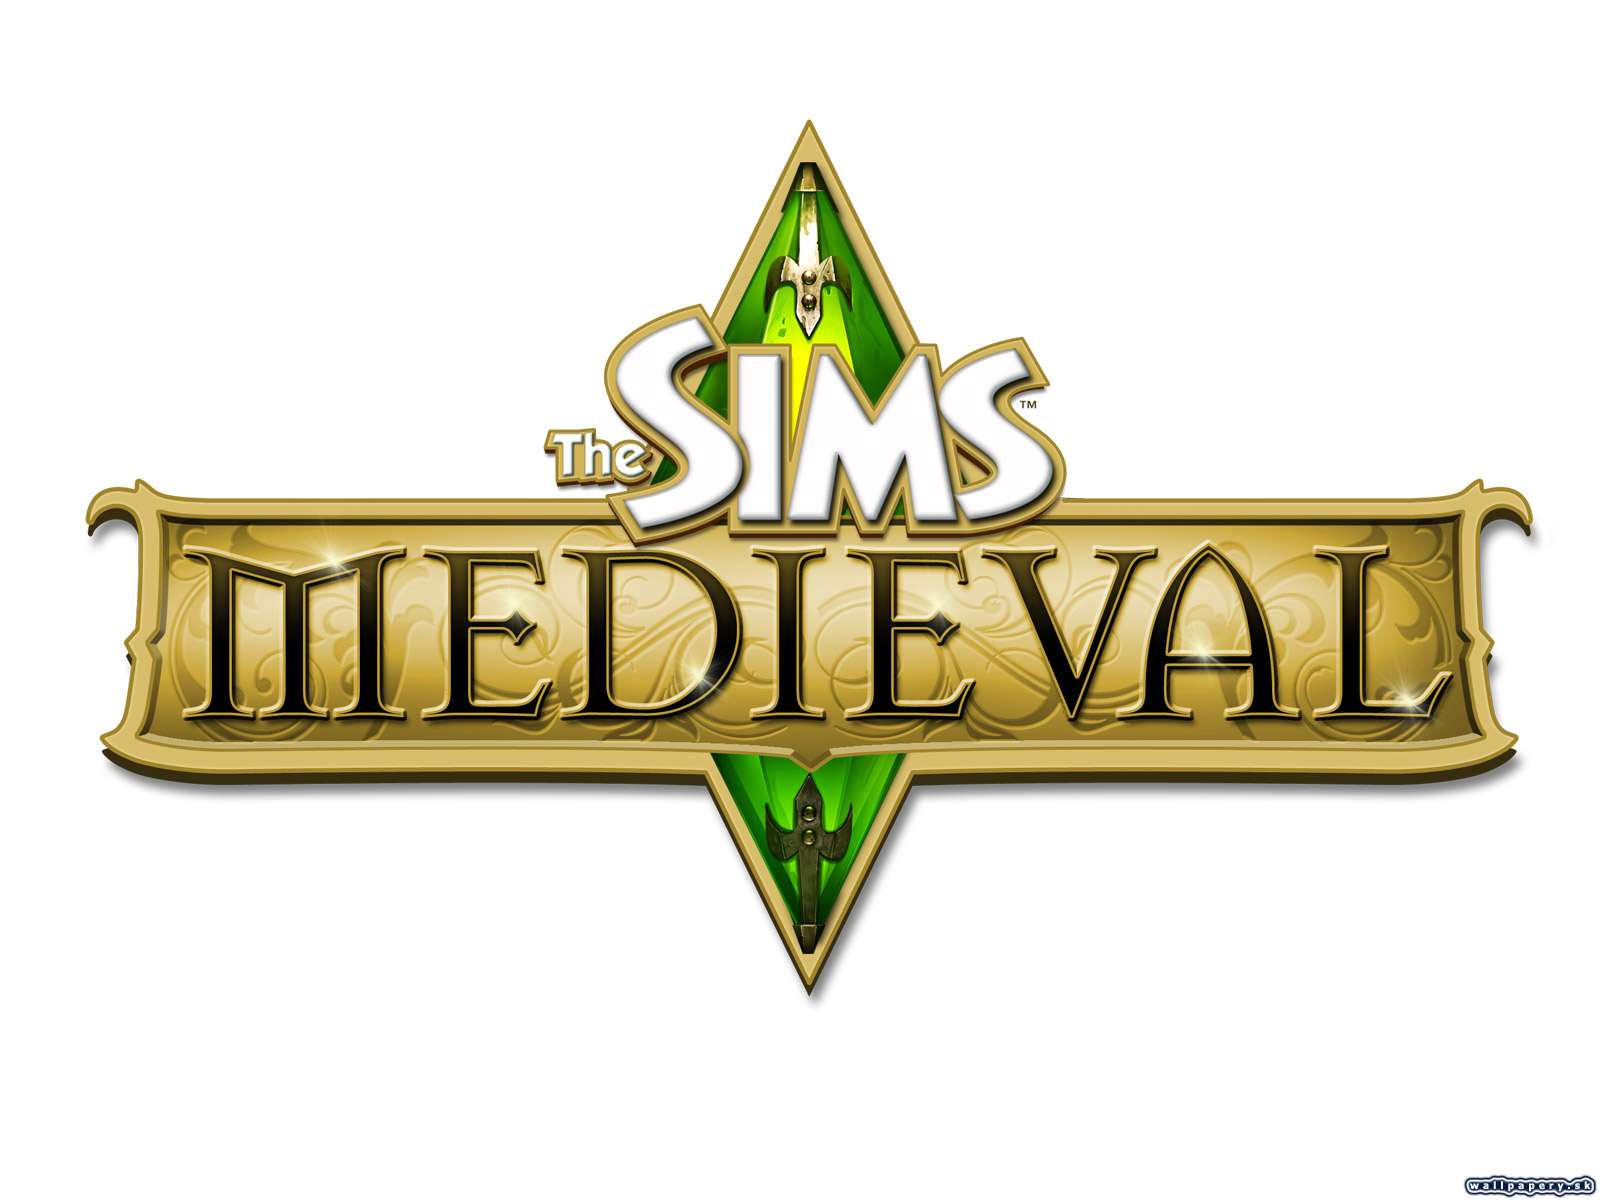 The Sims Medieval - wallpaper 4